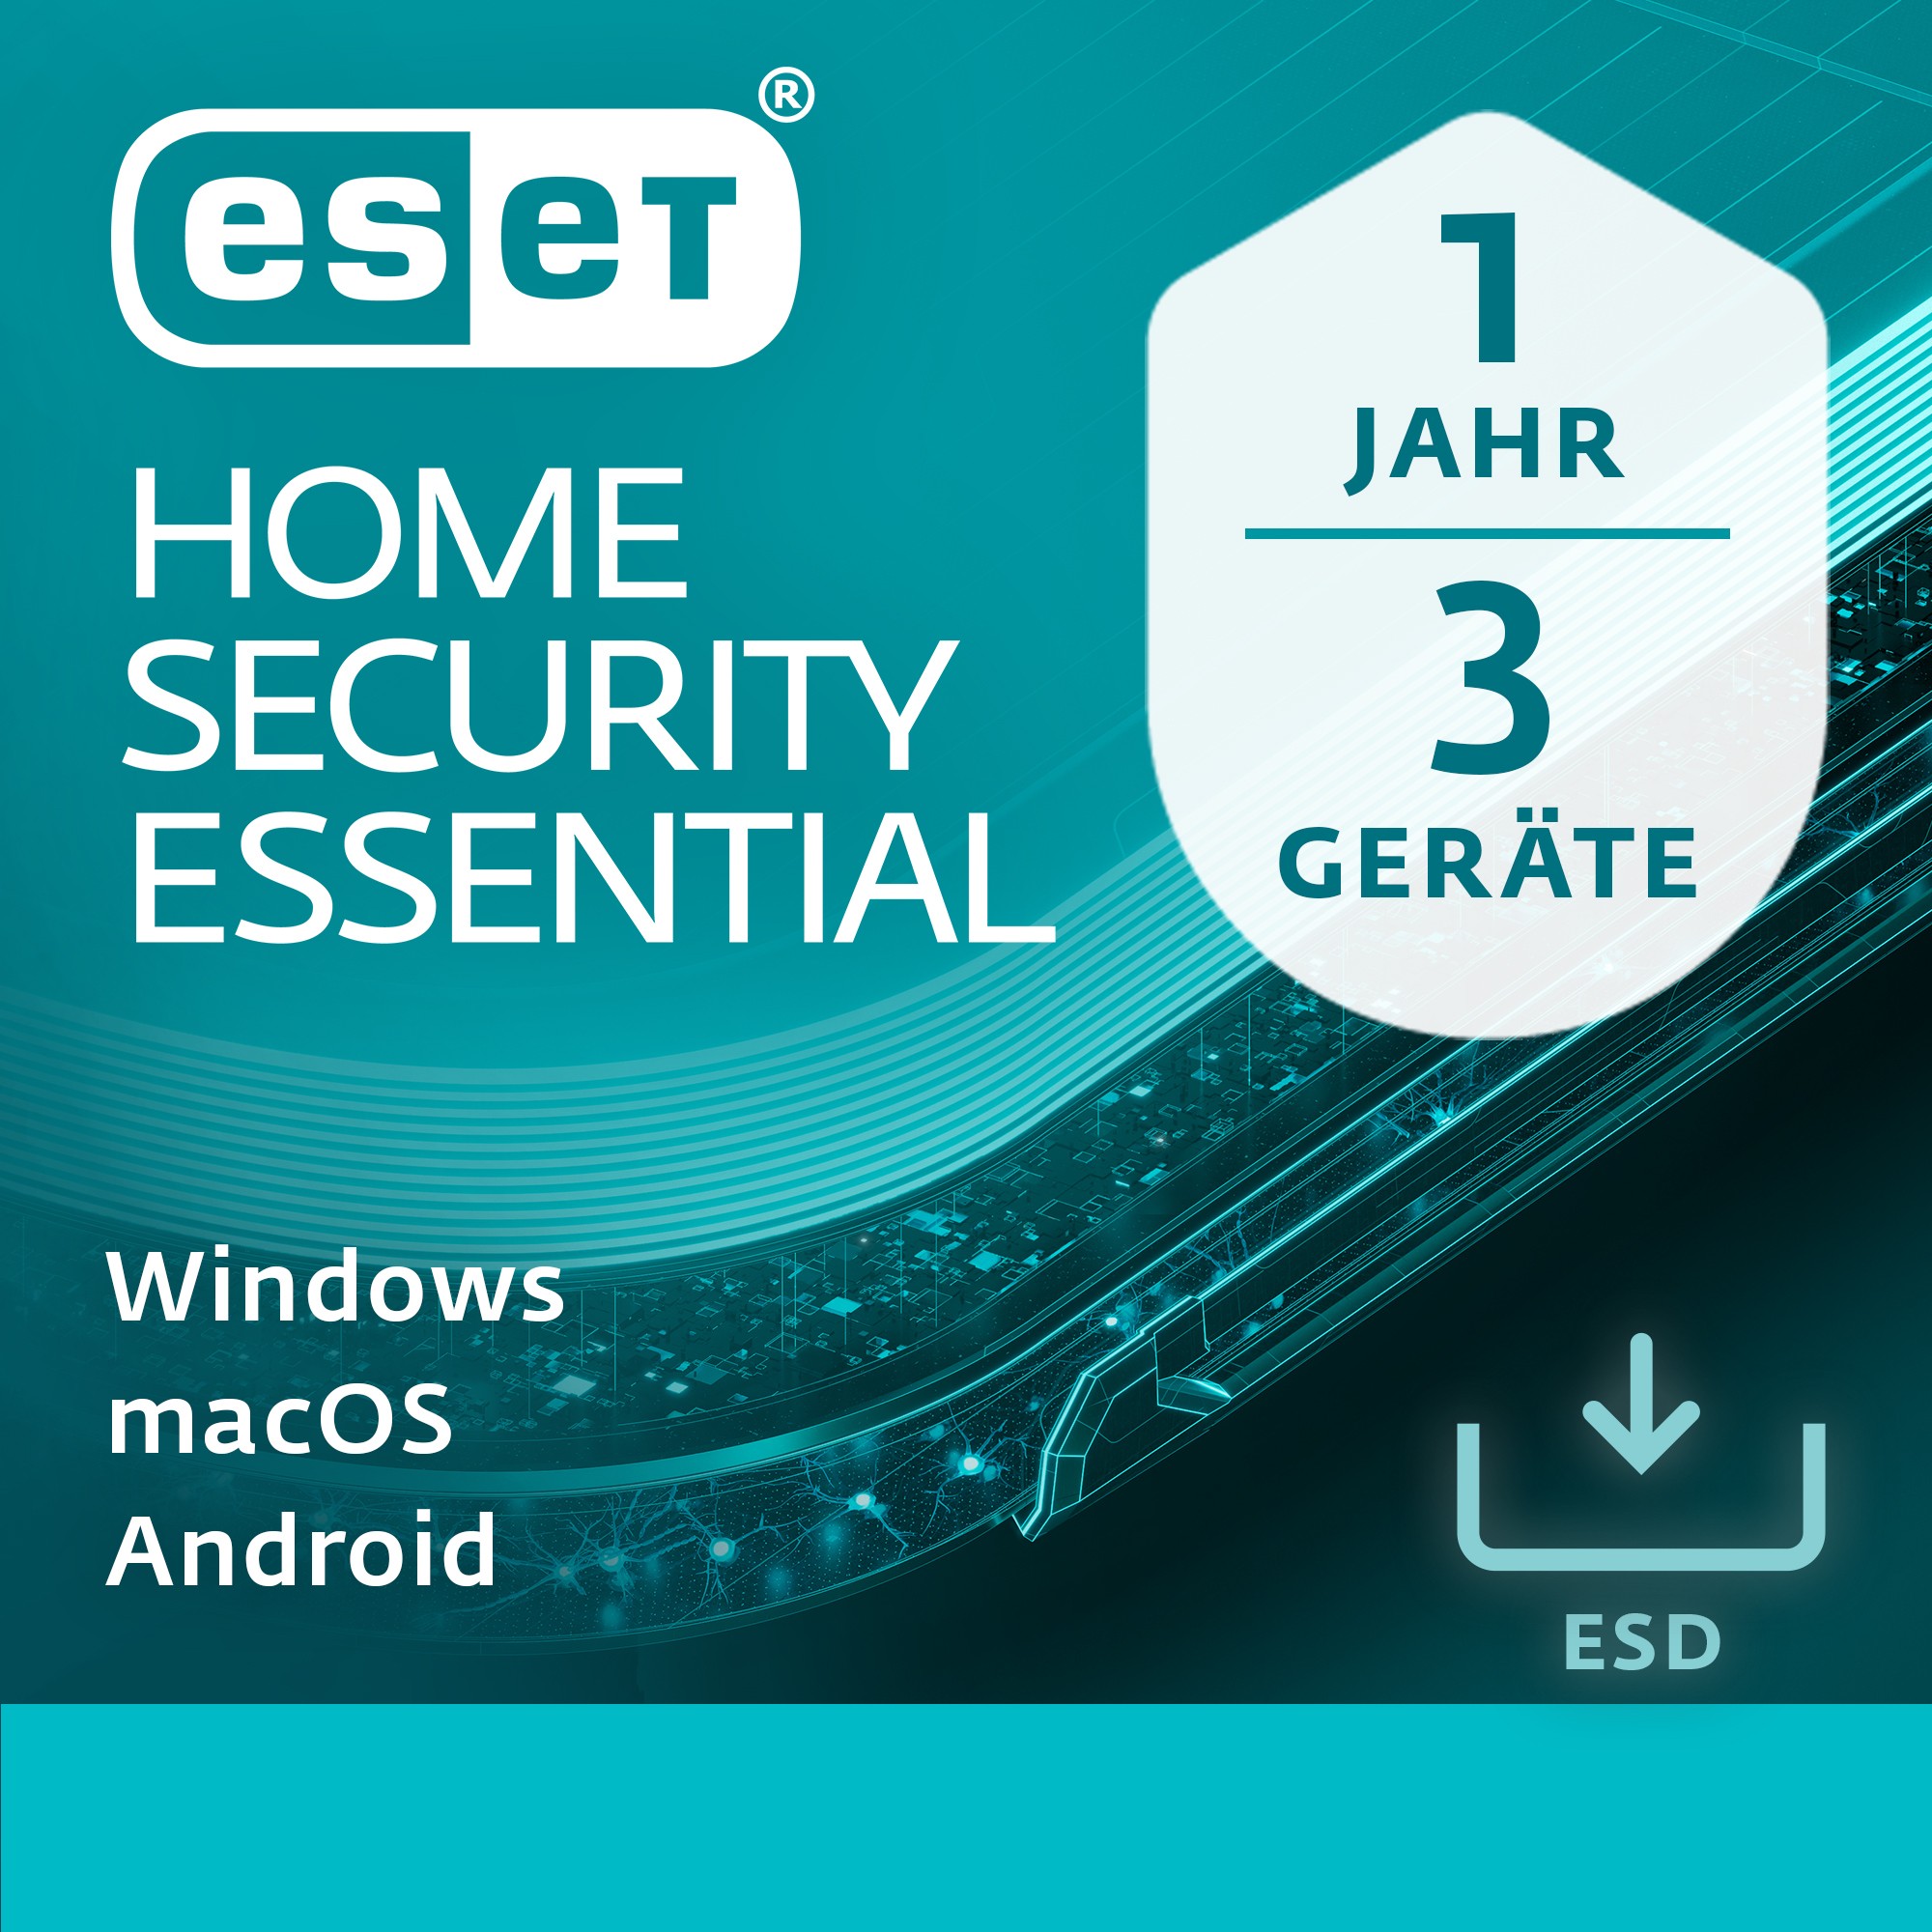 ESET Home Security Essential - 3 User. 1 Year - ESD-DownloadESD - EHSE-N1A3-VAKT-E